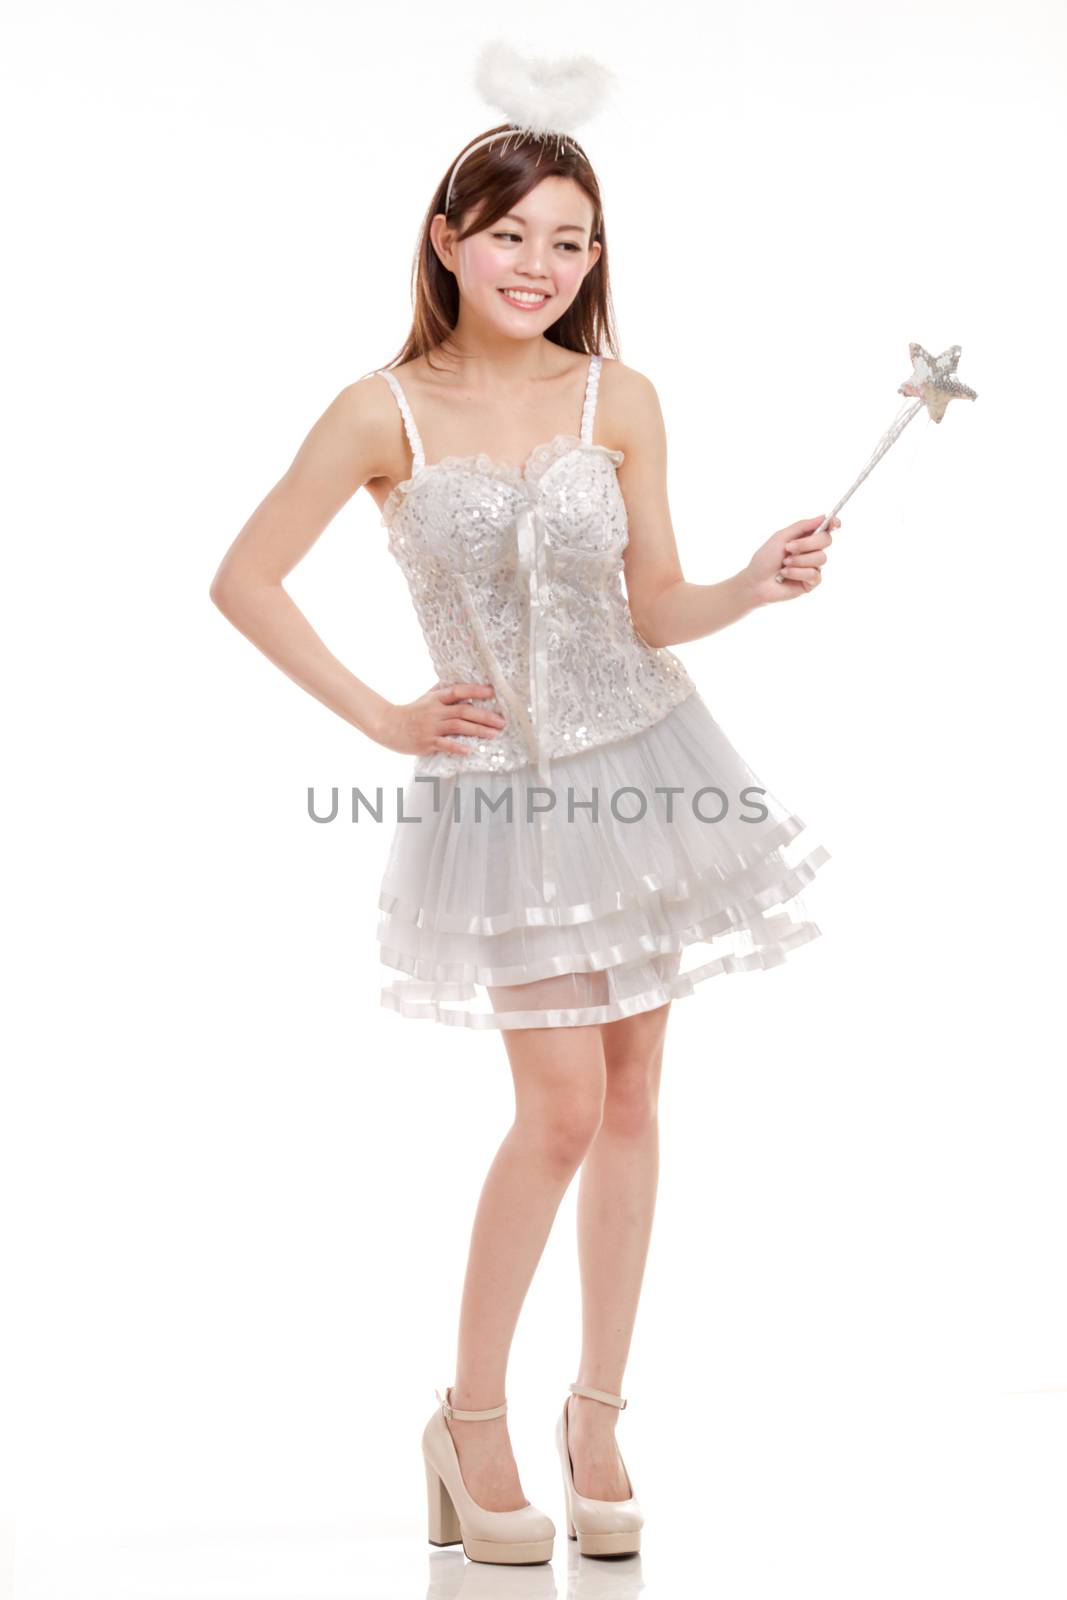 Malay woman in white angel fairy costume